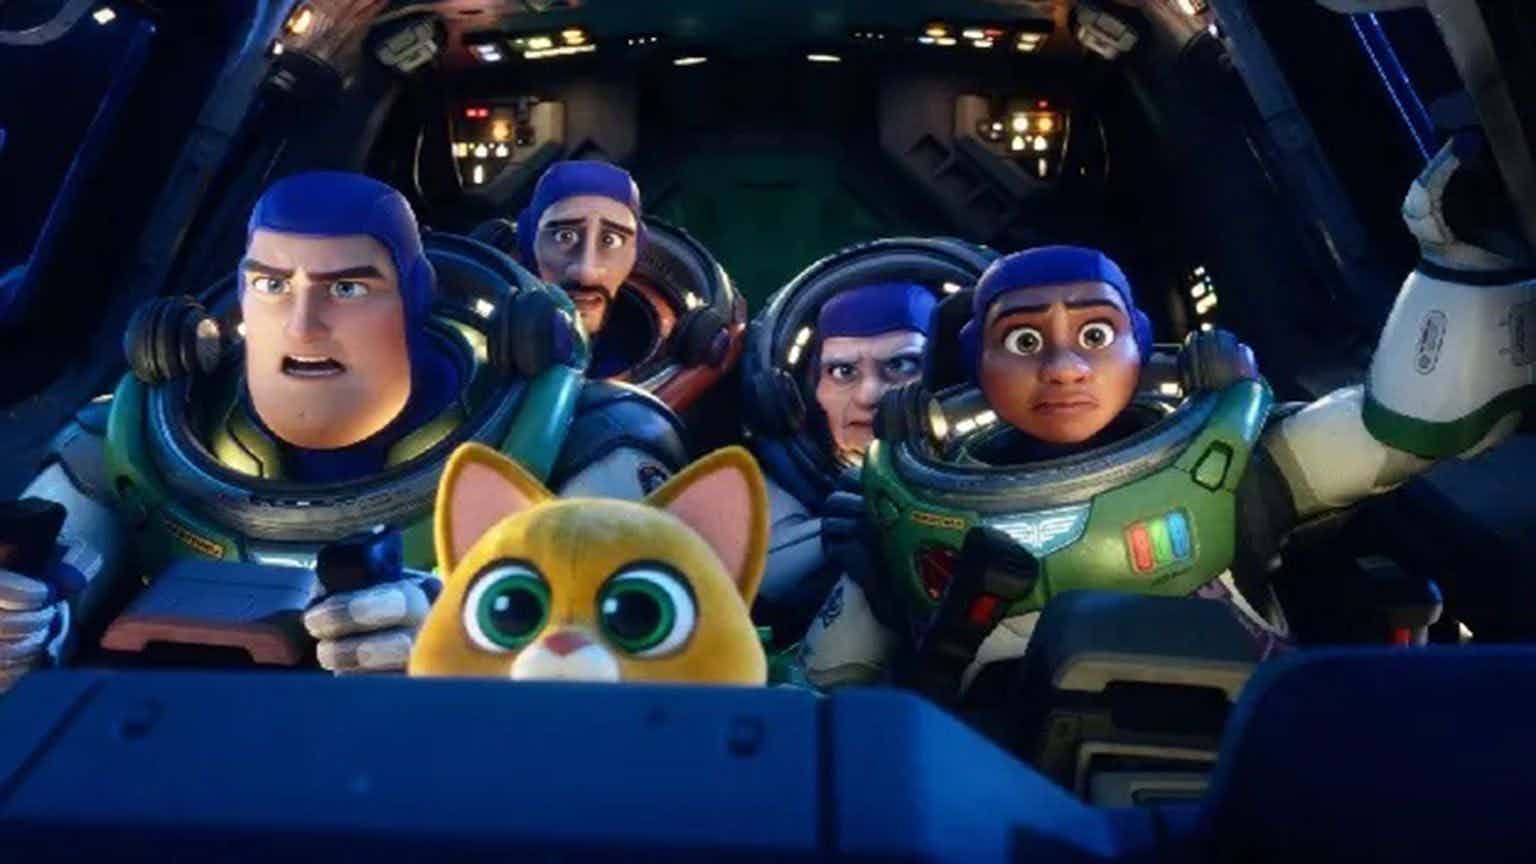 ‘Lightyear’ will not premiere in Muslim-dominated nations